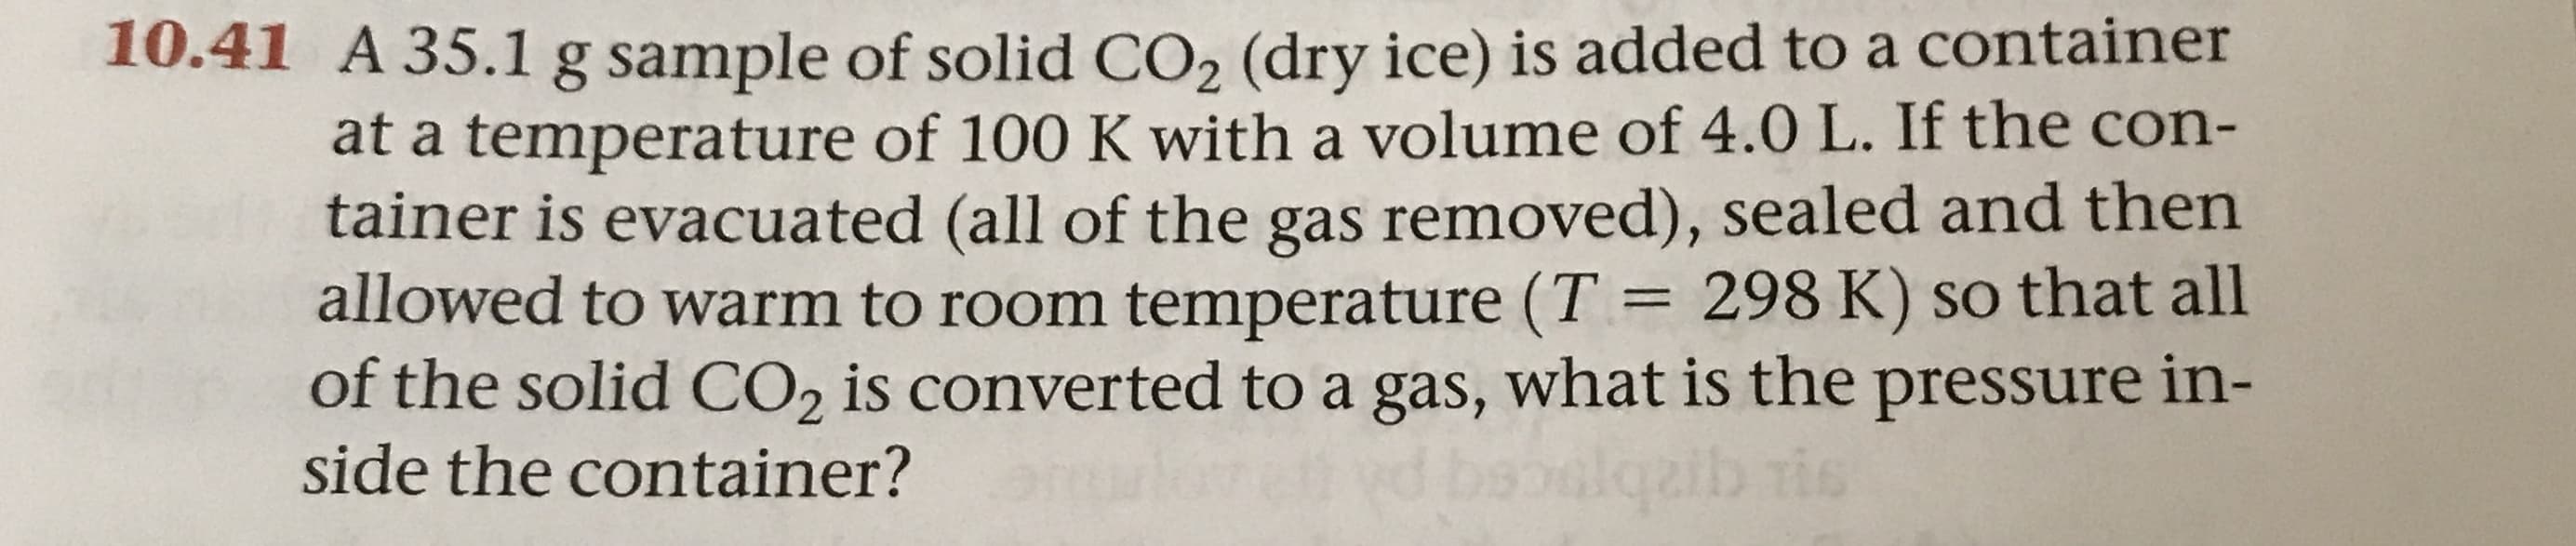 10.41 A 35.1 g sample of solid CO2 (dry ice) is added to a container
at a temperature of 100 K with a volume of 4.0 L. If the con-
tainer is evacuated (all of the gas removed), sealed and then
allowed to warm to room temperature (T = 298 K) so that all
of the solid CO2 is converted to a gas, what is the pressure in-
side the container?
tis
